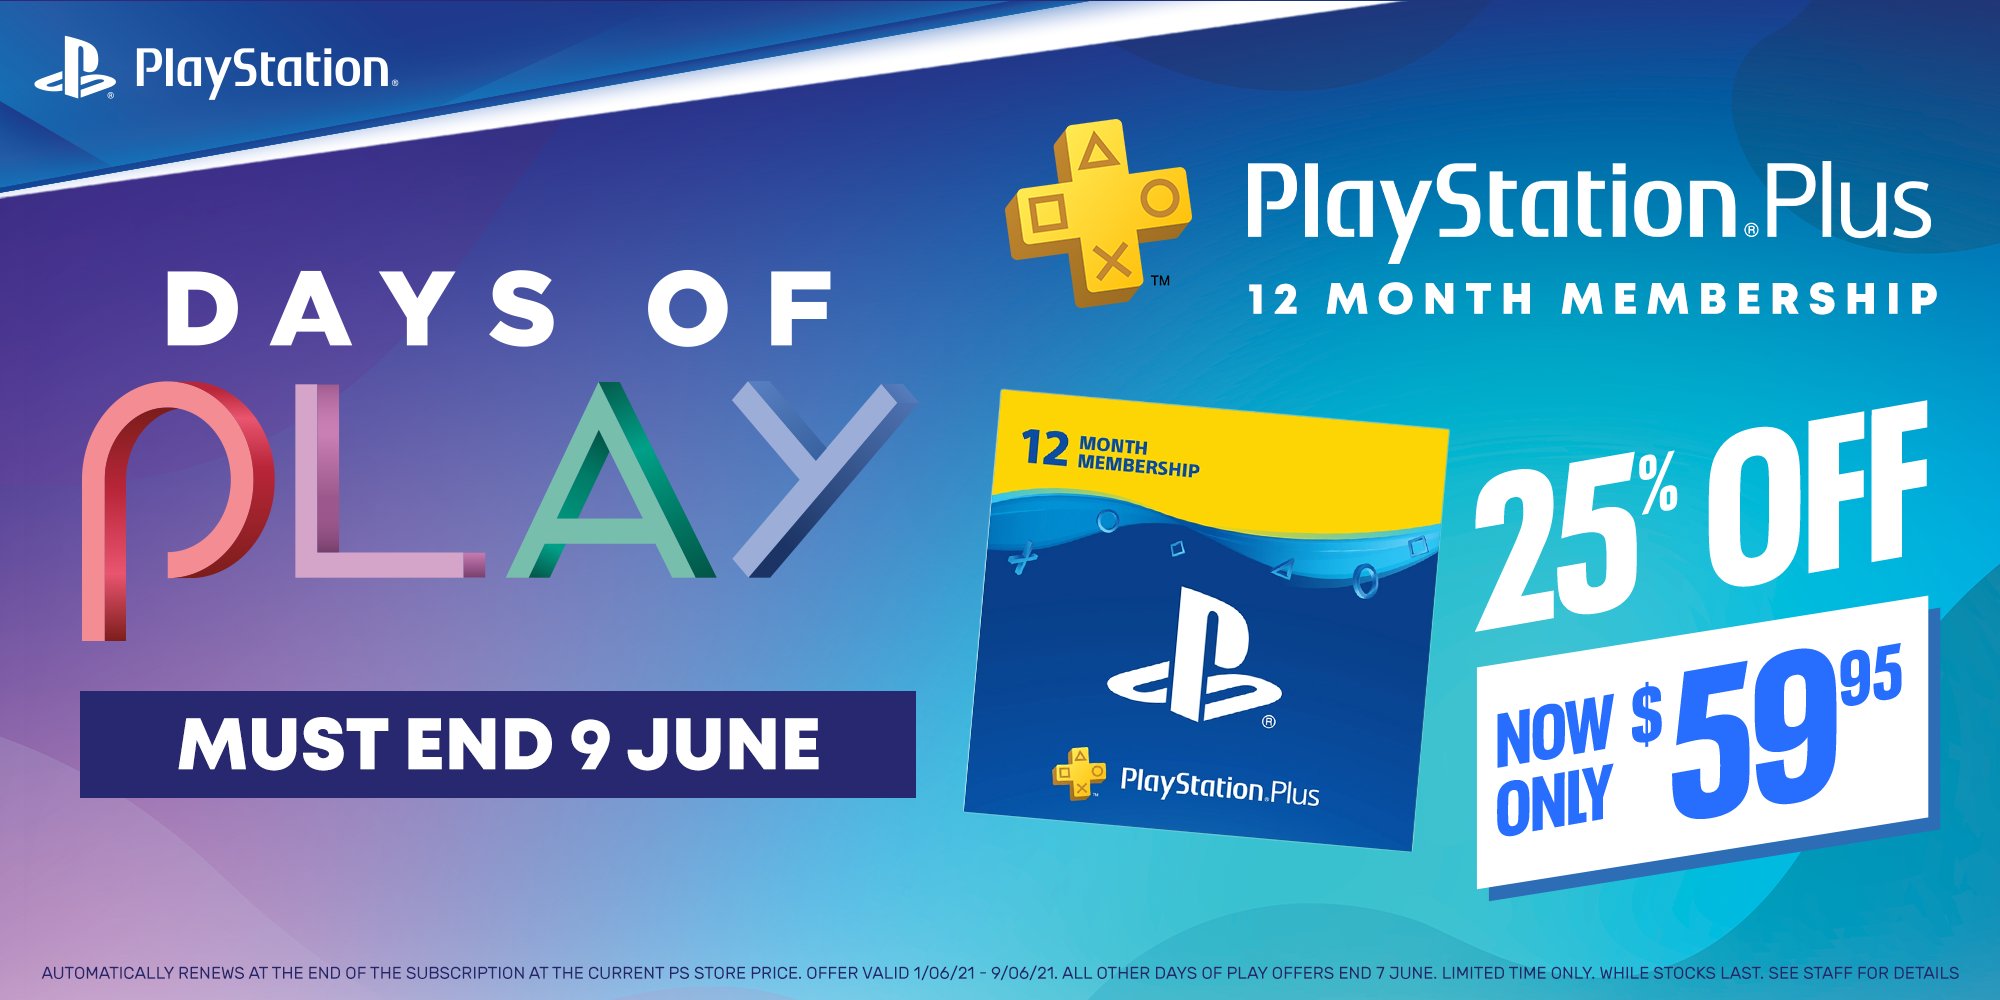 EB Games on "Days of Play is Get 25% OFF a 12-month PlayStation Plus membership at EB Games! 🎮 Play Has No https://t.co/aKoNuK7tO0 https://t.co/722h0GPSG8" / Twitter